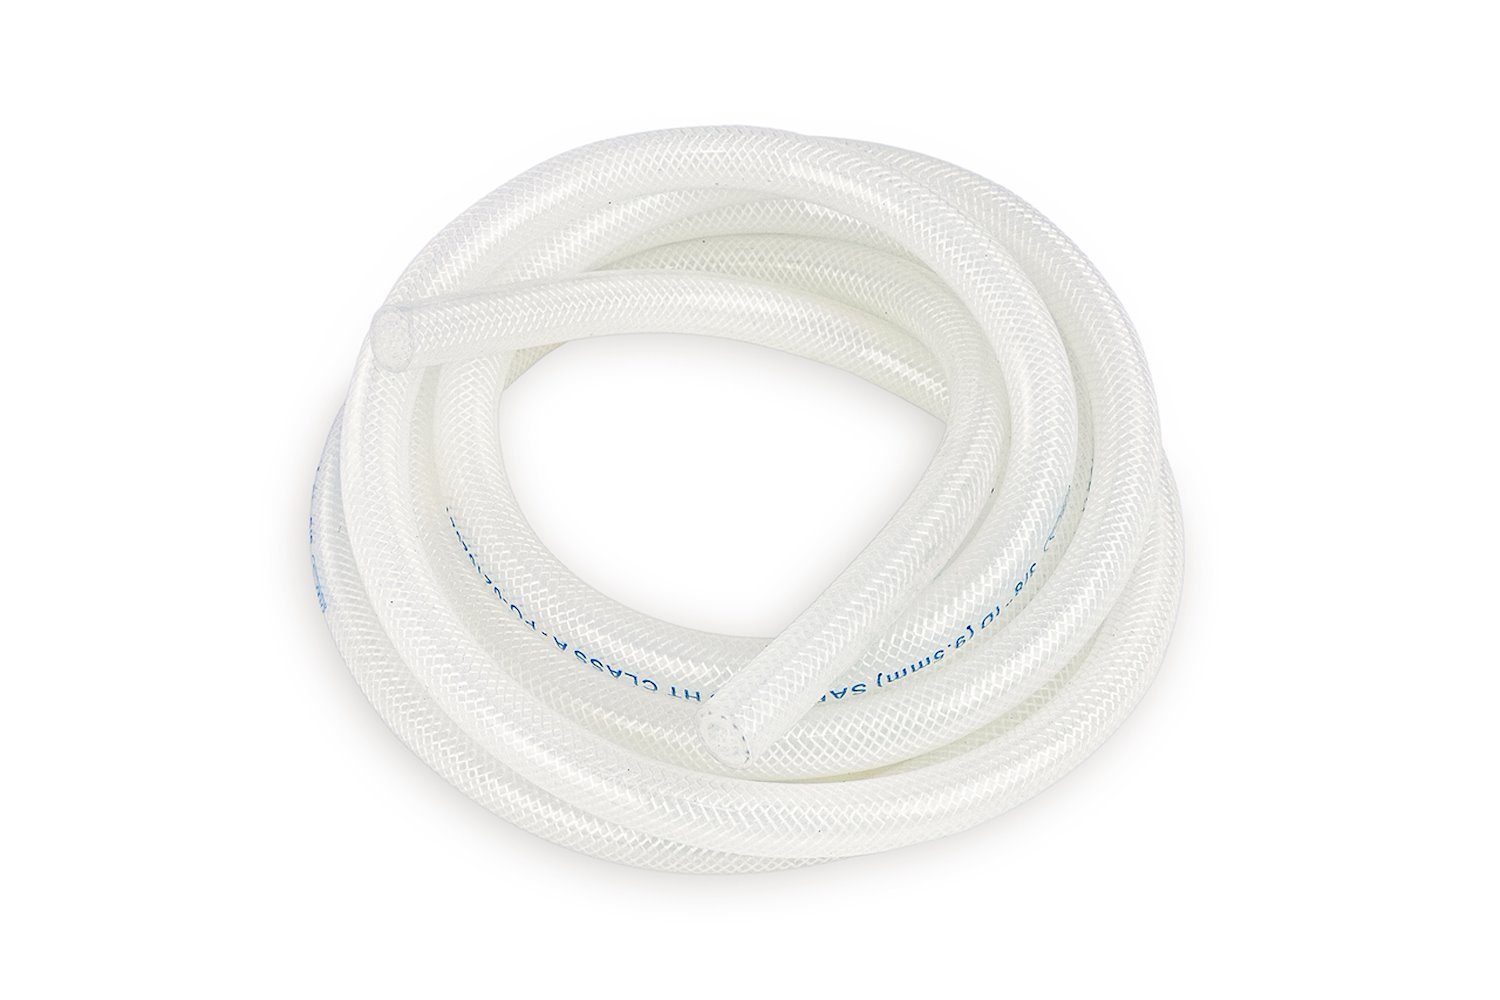 HTHH-025-CLEARx10 Silicone Heater Hose Tubing, High-Temp Reinforced, 1/4 in. ID, 10 ft. Roll, Clear